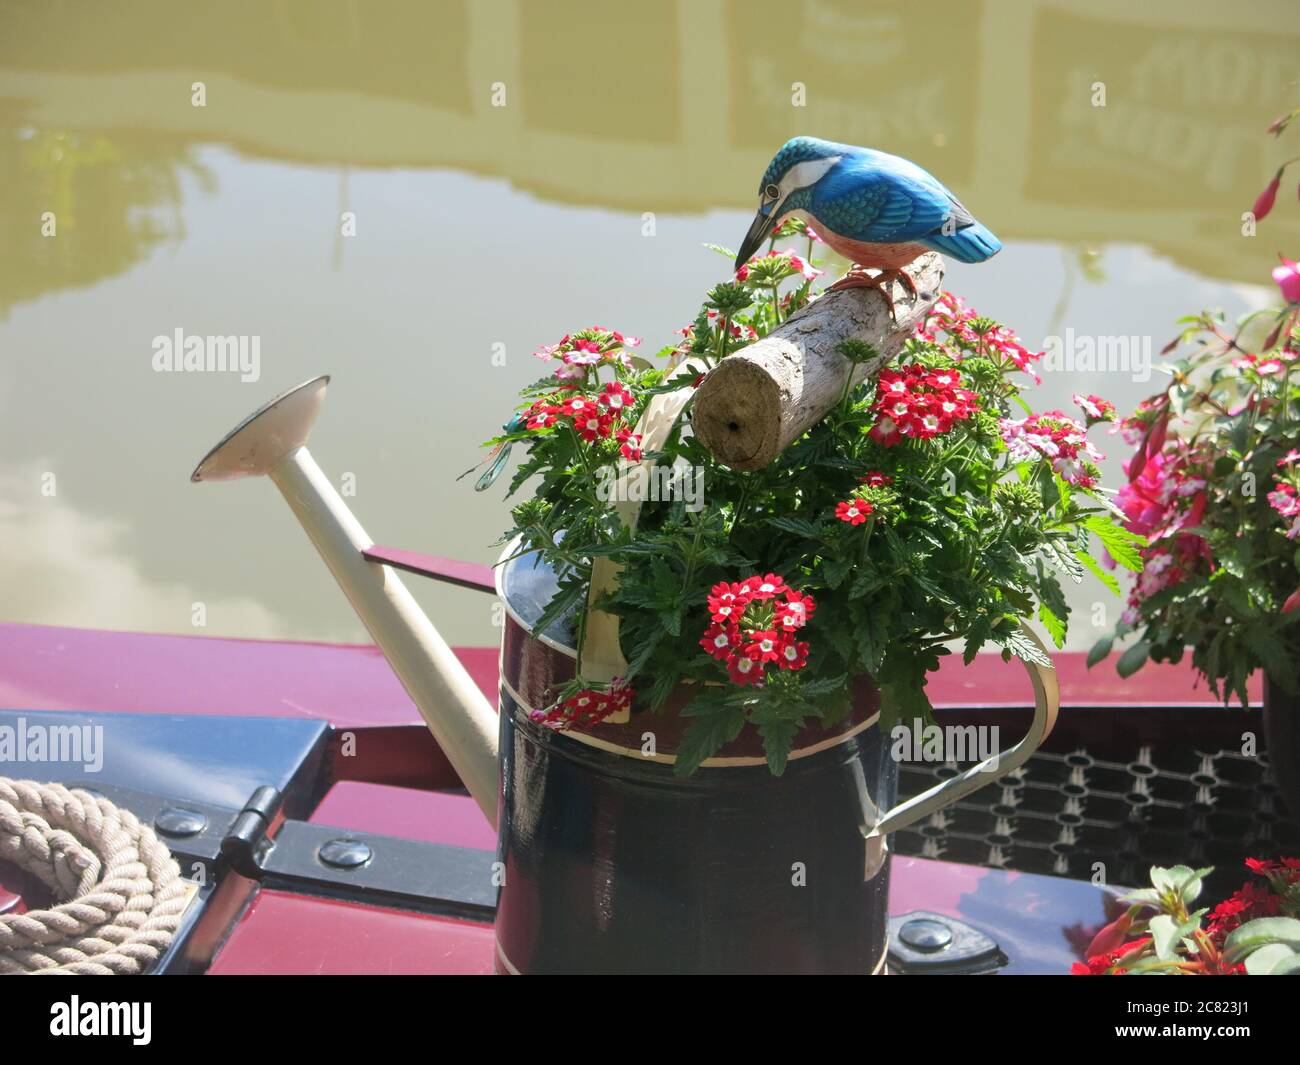 A decorated watering can painted in canal folk art style, filled with summer planting and a model bird on a log. Stock Photo